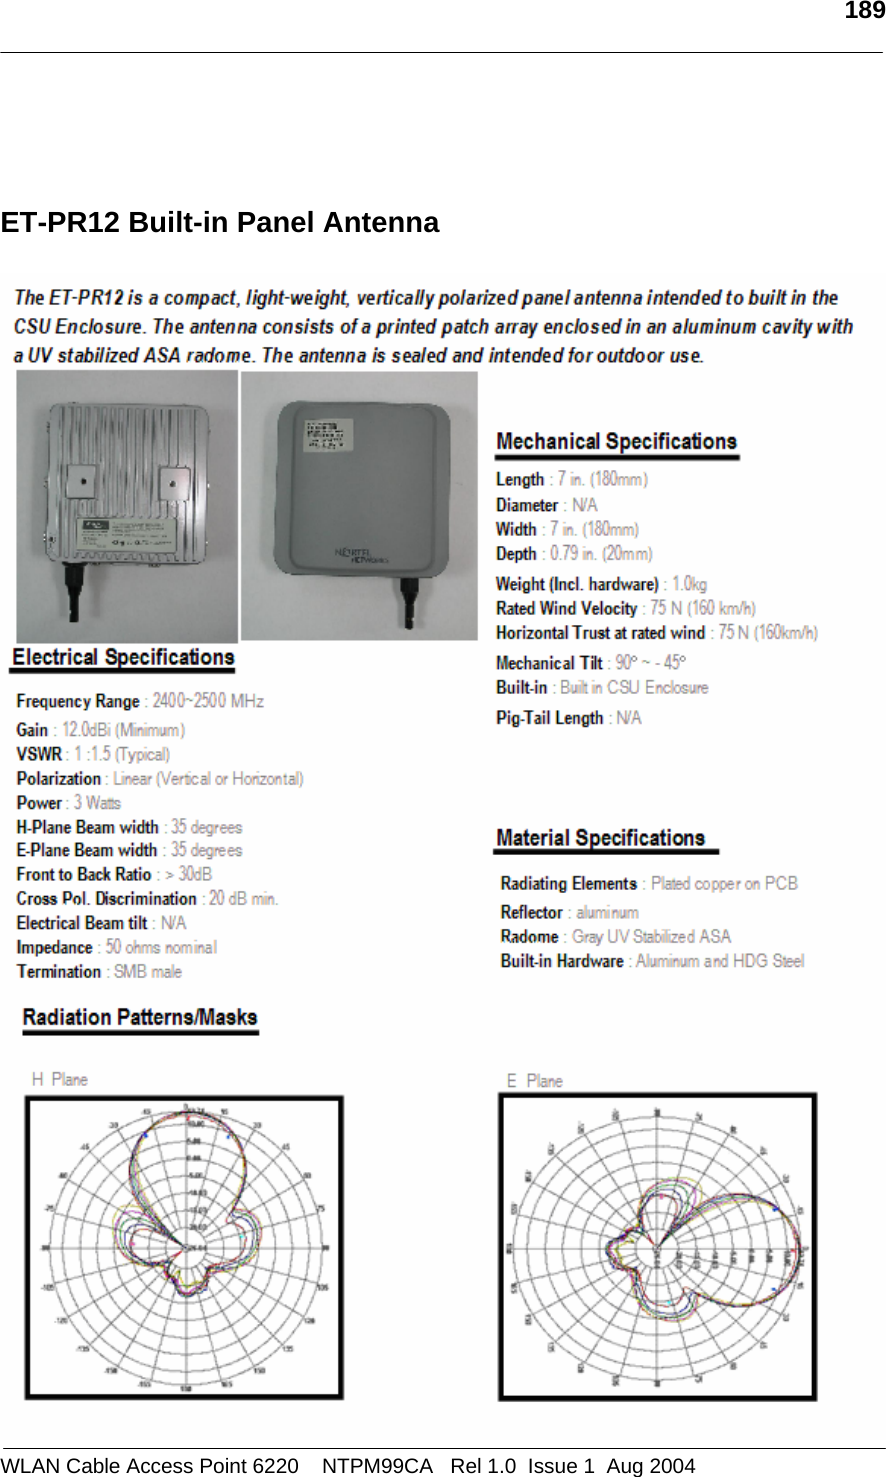   189     ET-PR12 Built-in Panel Antenna   WLAN Cable Access Point 6220    NTPM99CA   Rel 1.0  Issue 1  Aug 2004 